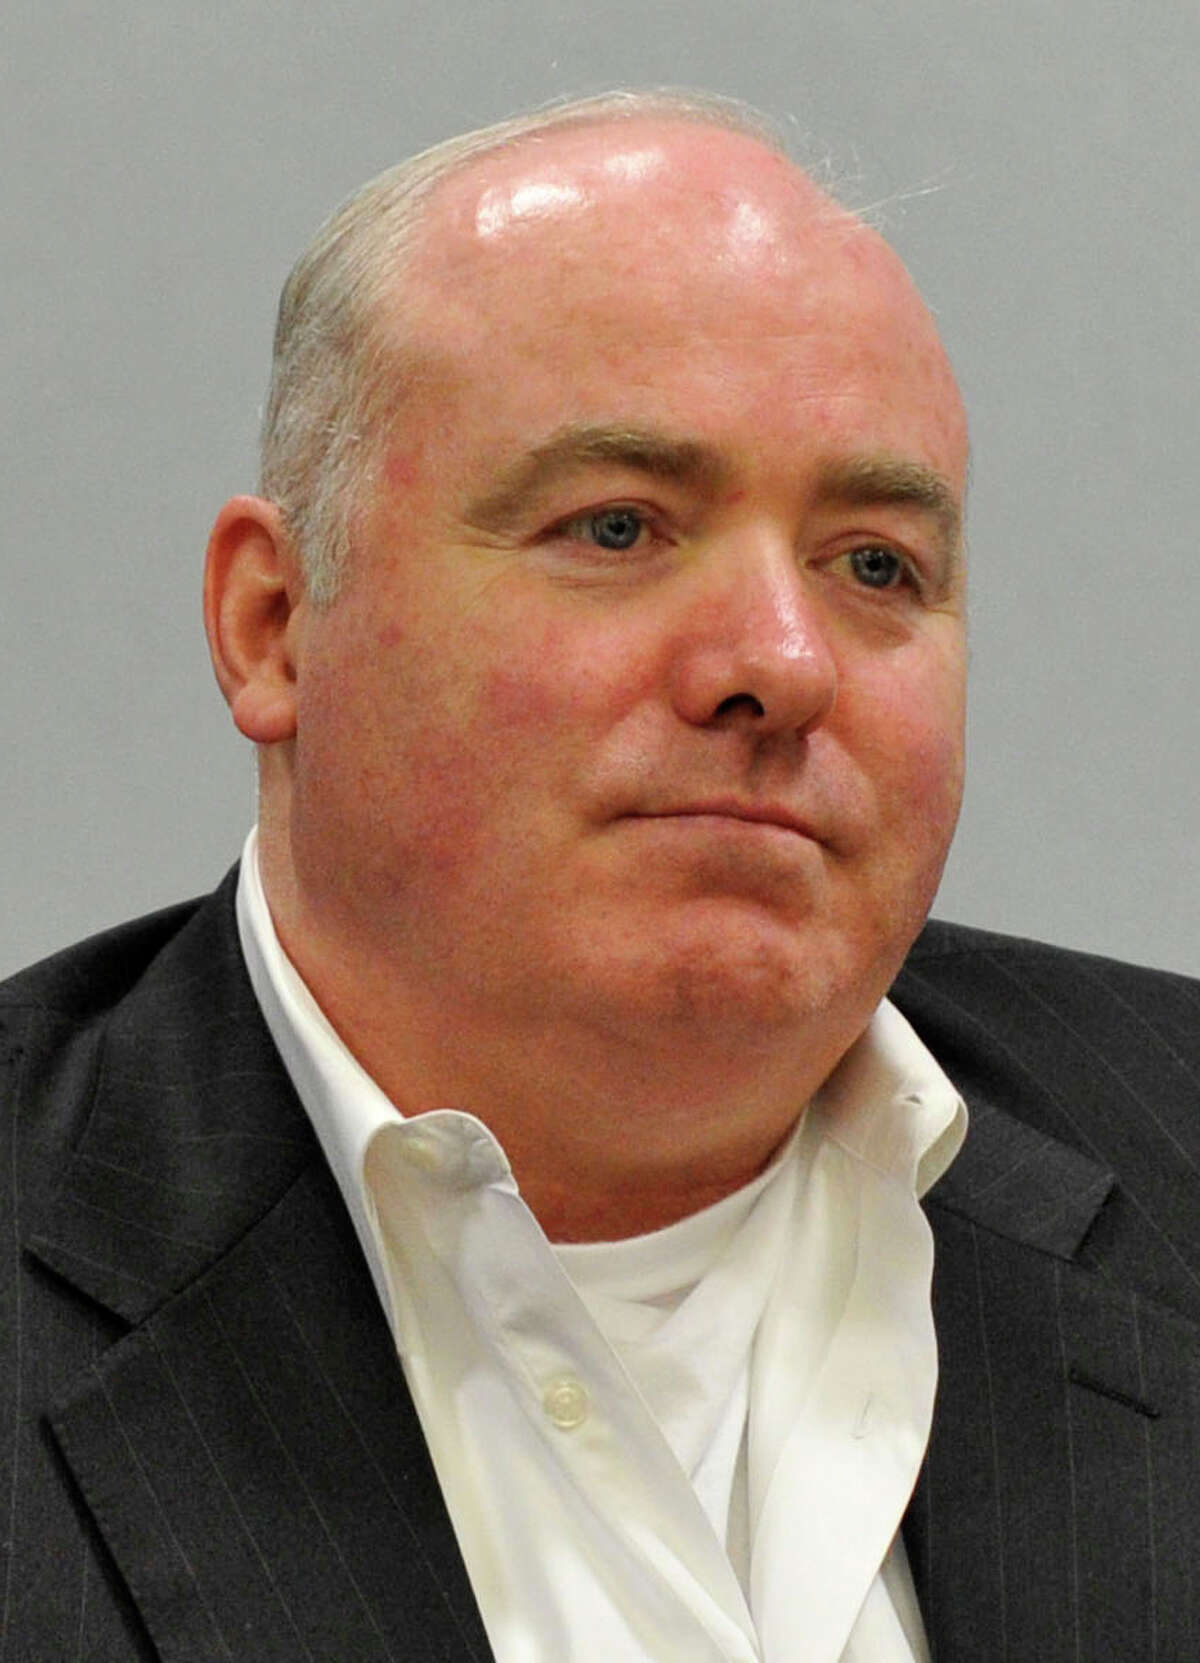 Michael Skakel listens to his former defense attorney Mickey Sherman testify at Skakel's habeas corpus trial at State Superior Court in Vernon, Conn., on Friday, April 26, 2013.